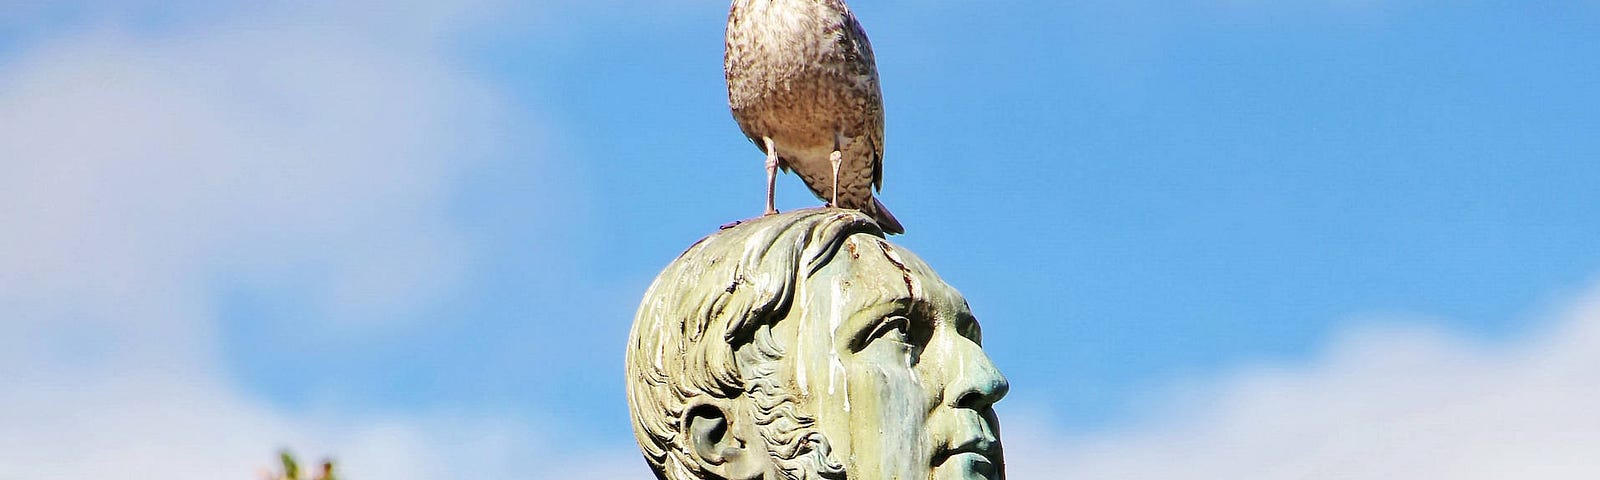 A seagull sits irreverently on top of a verdigris stained statue of a man, with a smattering of bird poo down its face